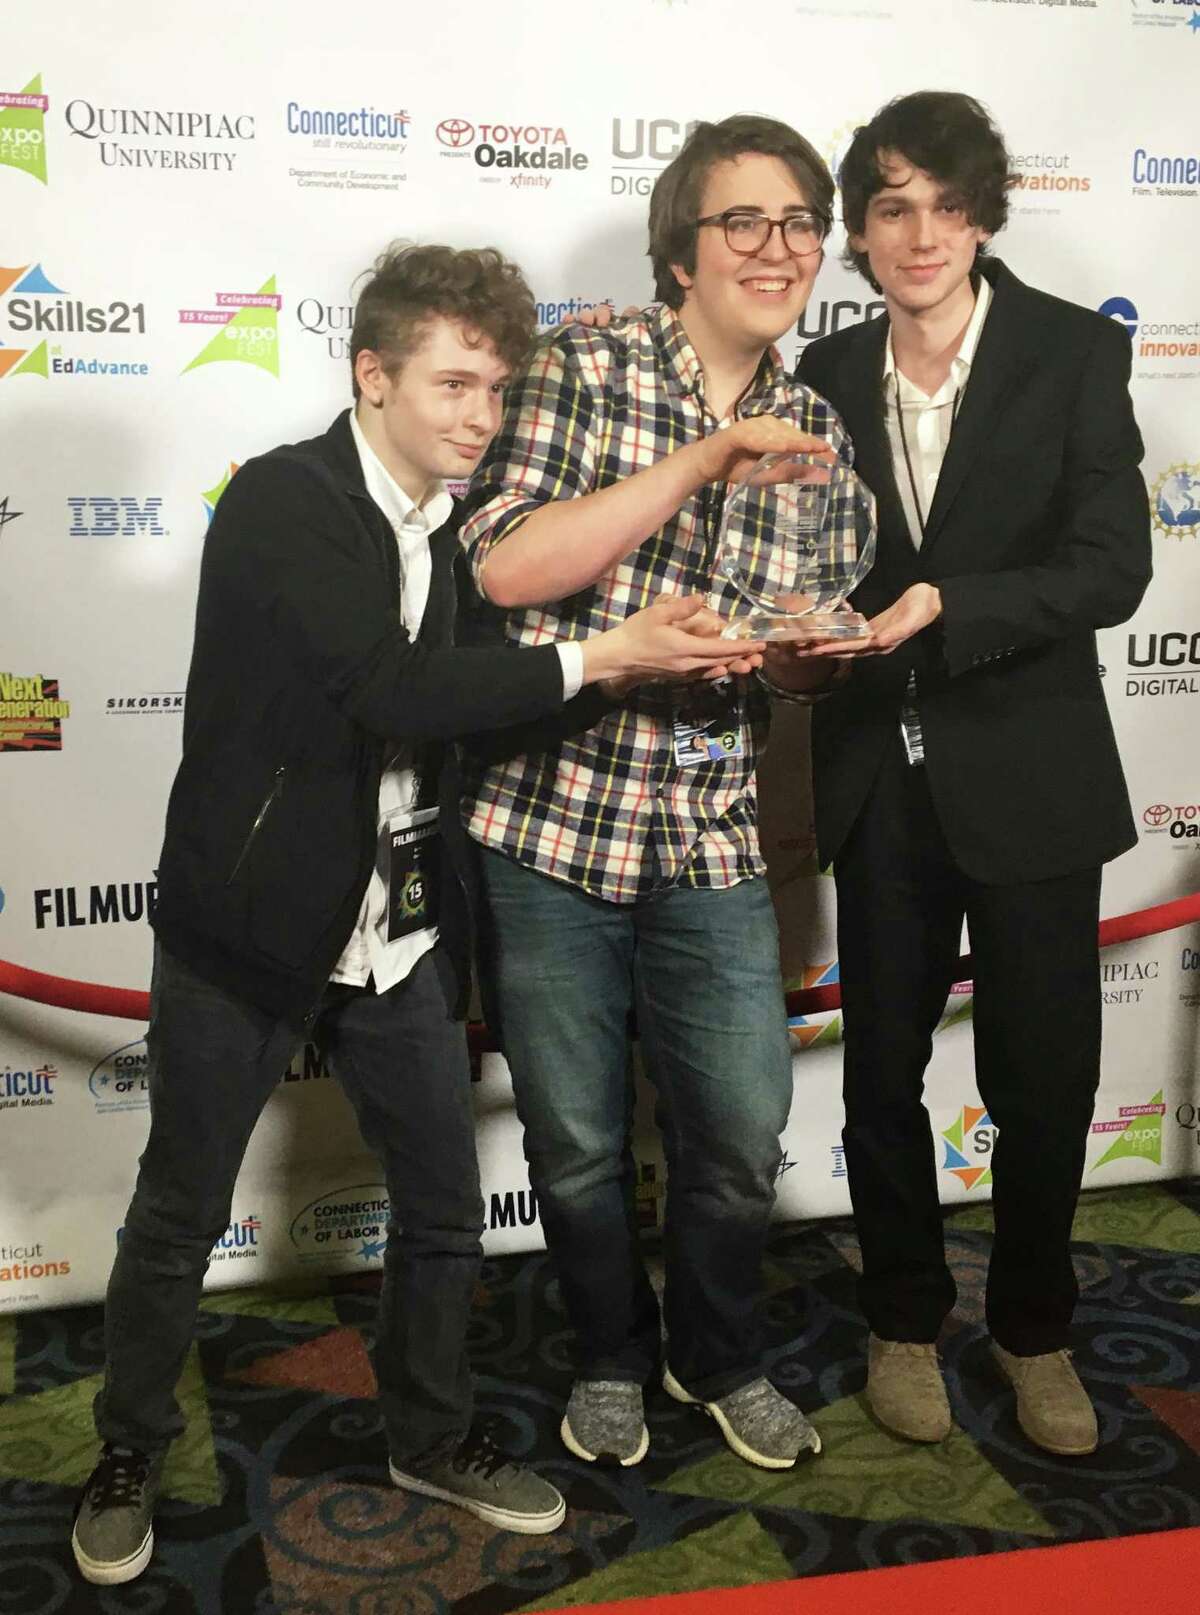 High school students at Shepaug Valley School in Washington recently won first place with the 84-Hour Film Challenge, Best Editing Award for the teams film ”Unwanted.” The winners of the film are, from left to right, Seth Caco, Alvin Hermans and Sean McCabe.